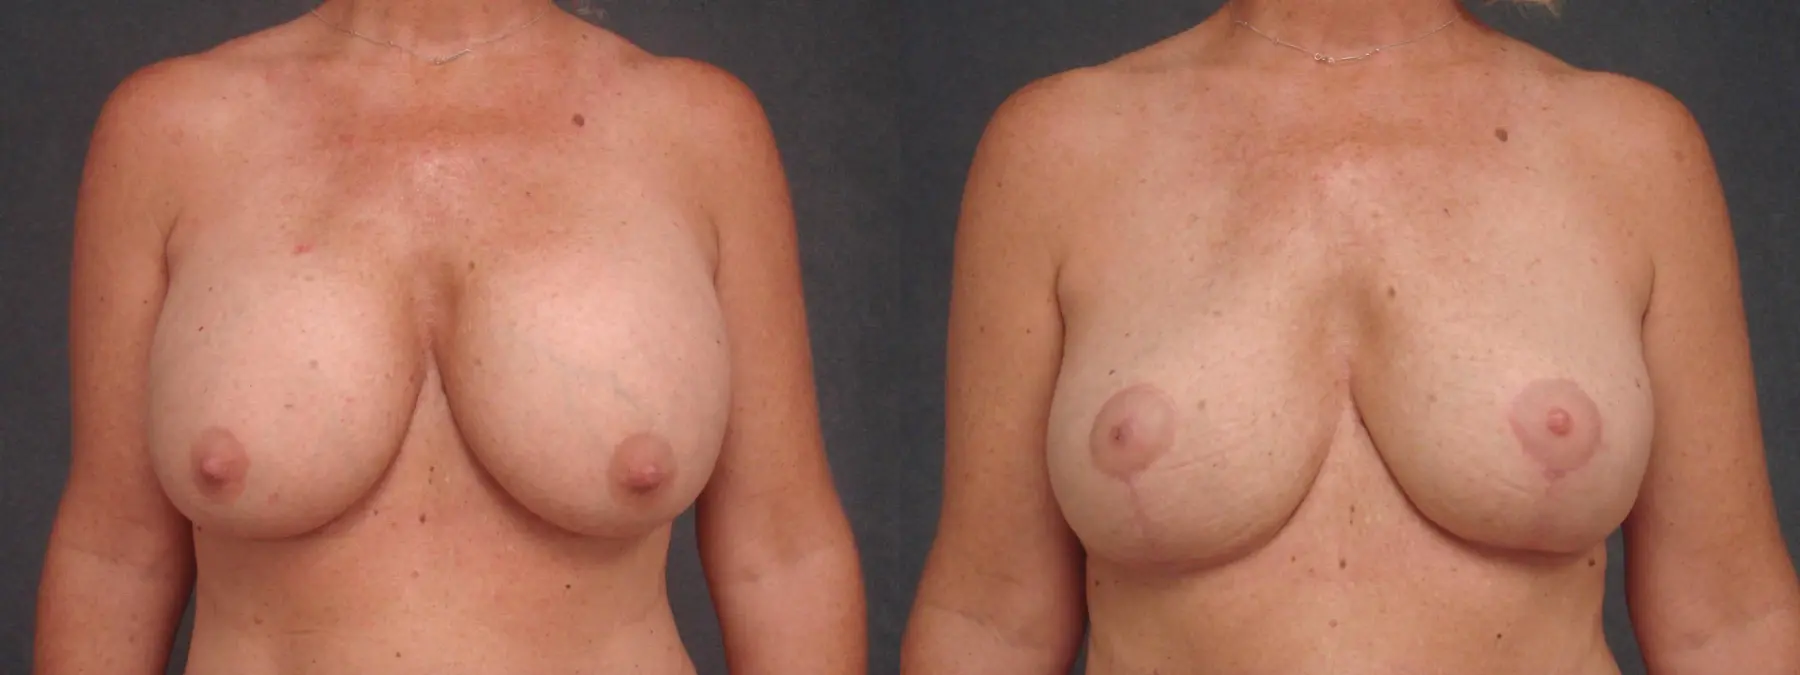 Breast Implant Removal With Lift: Patient 2 - Before and After 1